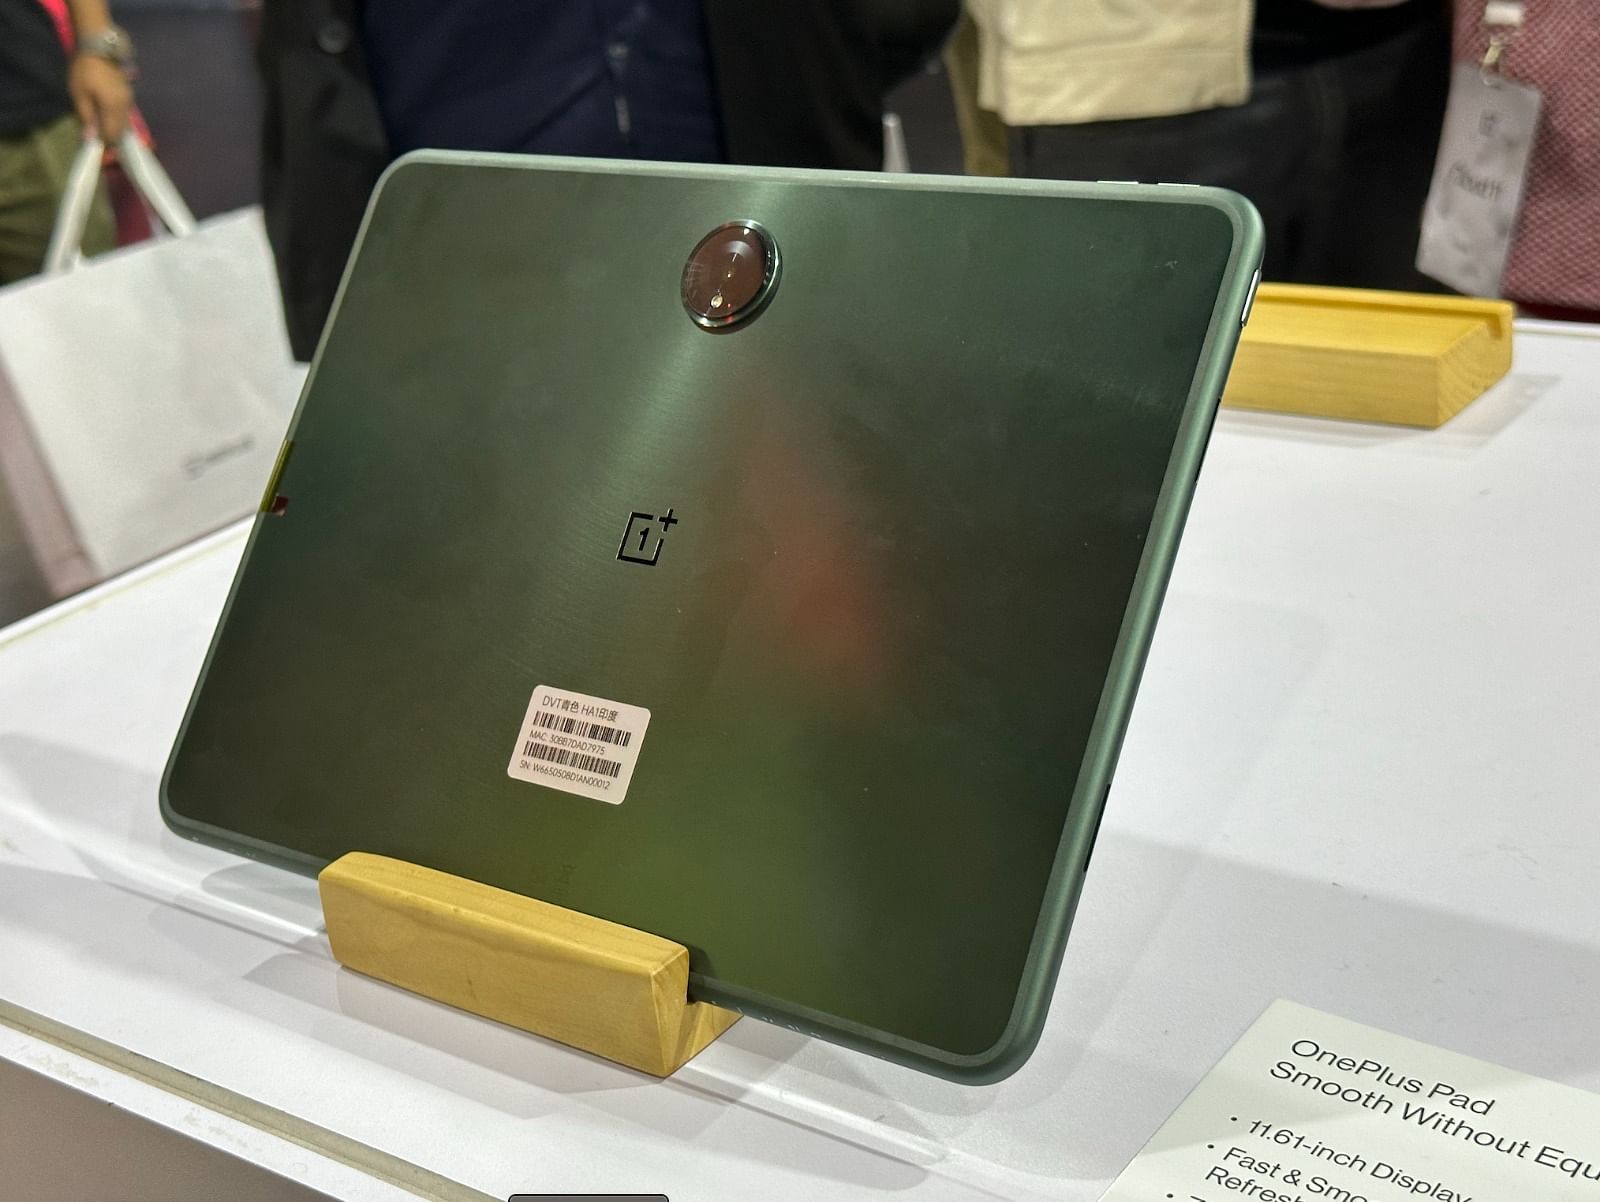 OnePlus Pad on display at OnePlus Cloud 11 event in Delhi. Credit: DH Photo/KVN Rohit